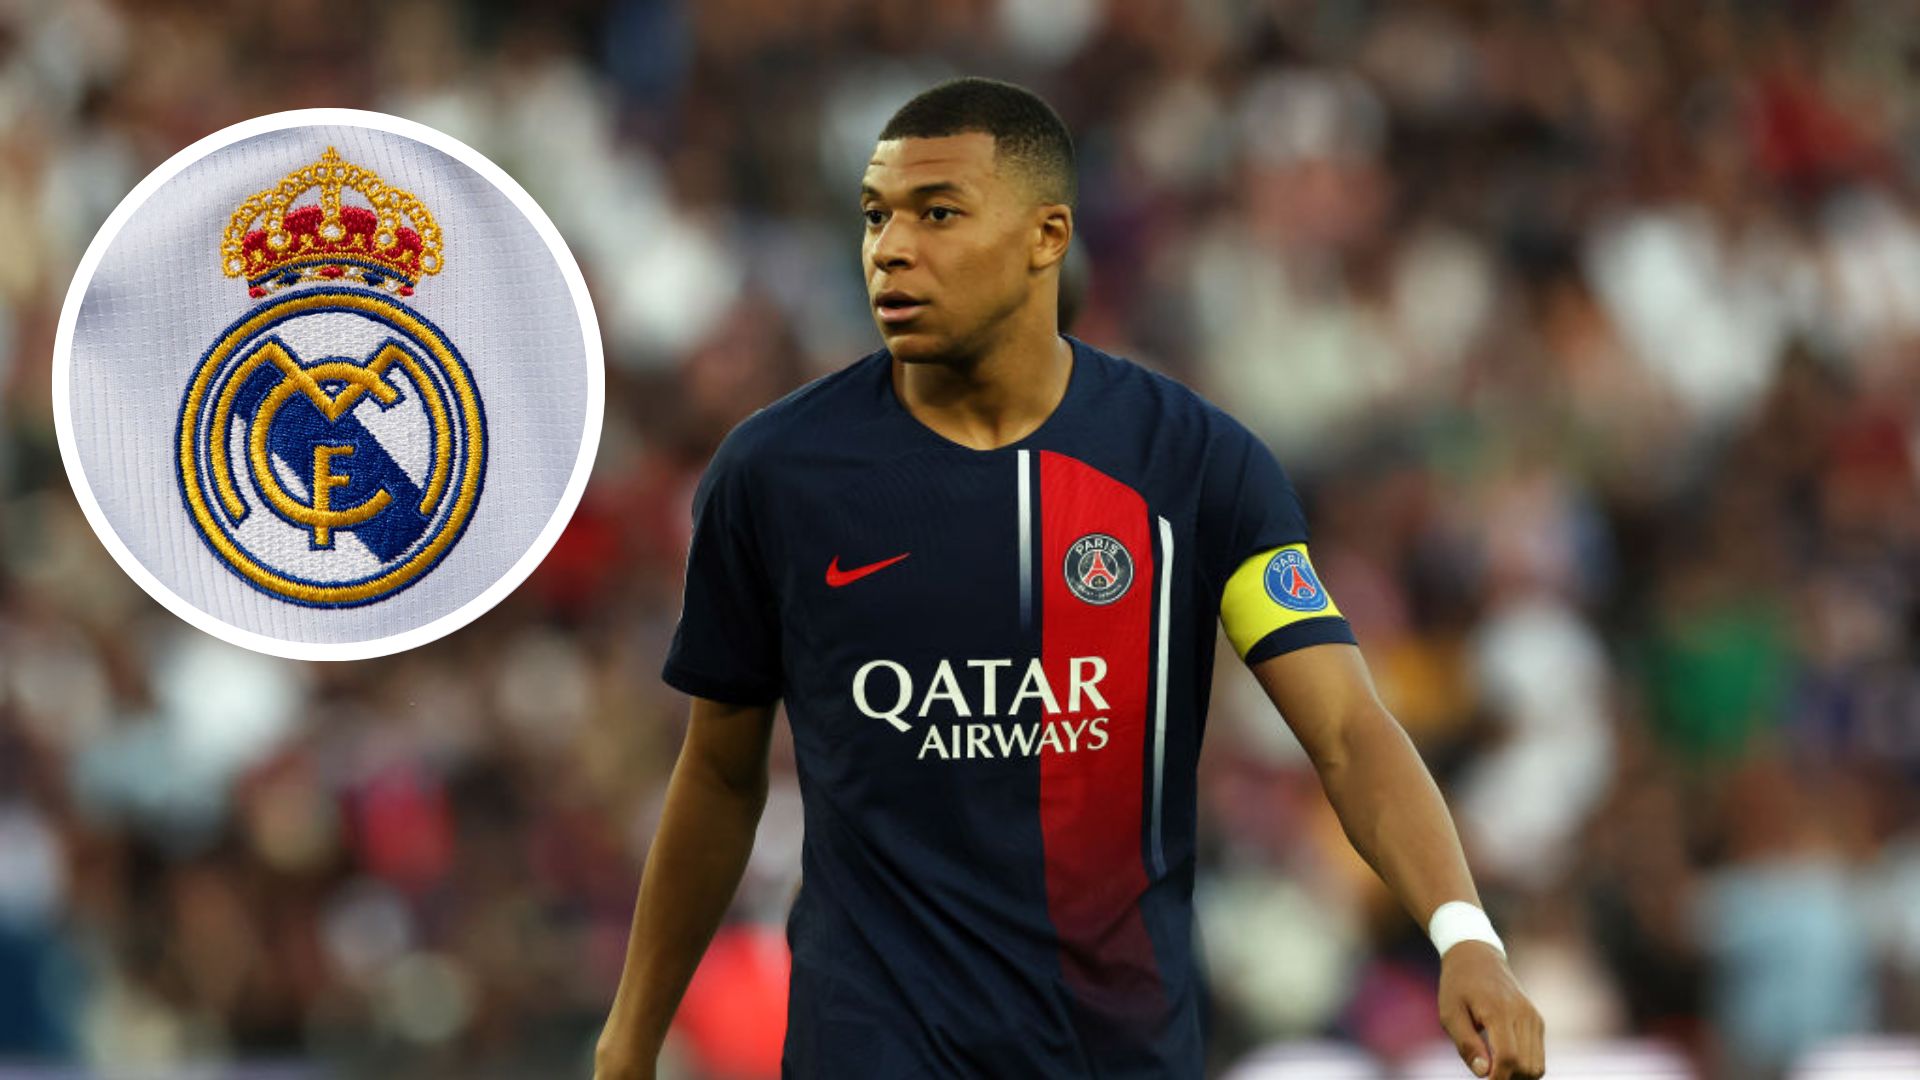 Real Madrid agree incredible €250m transfer with PSG for Kylian Mbappe: report